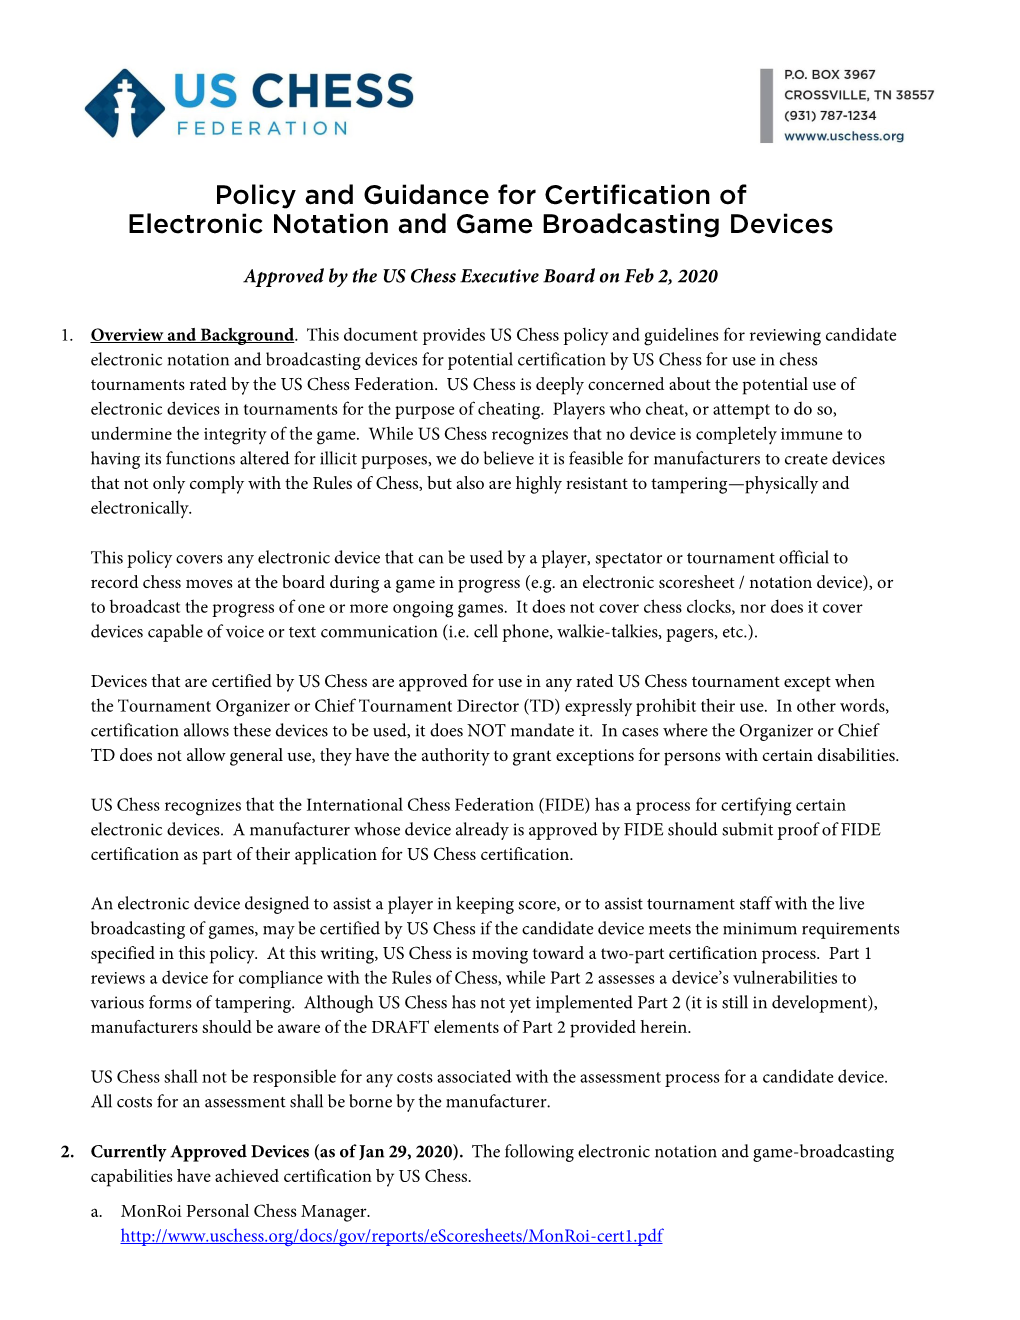 Policy and Guidance for Certification of Electronic Notation and Game Broadcasting Devices